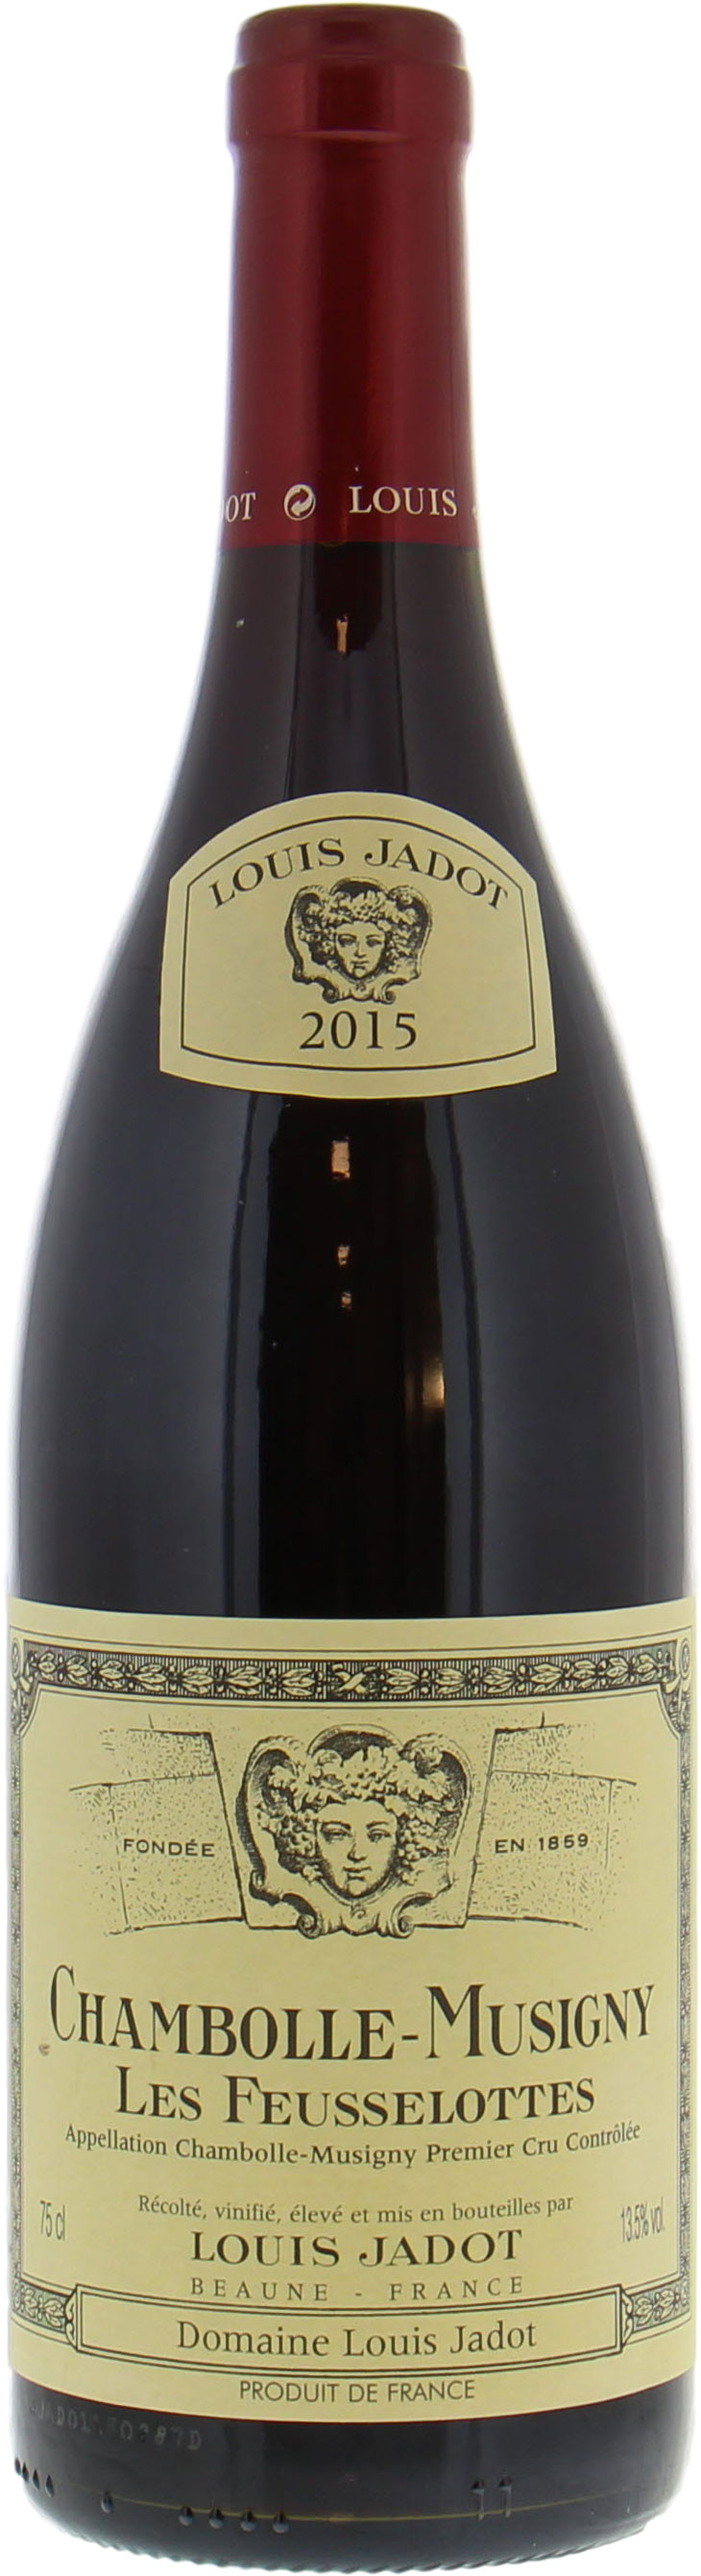 Jadot - Chambolle Musigny les Feusselottes 2015